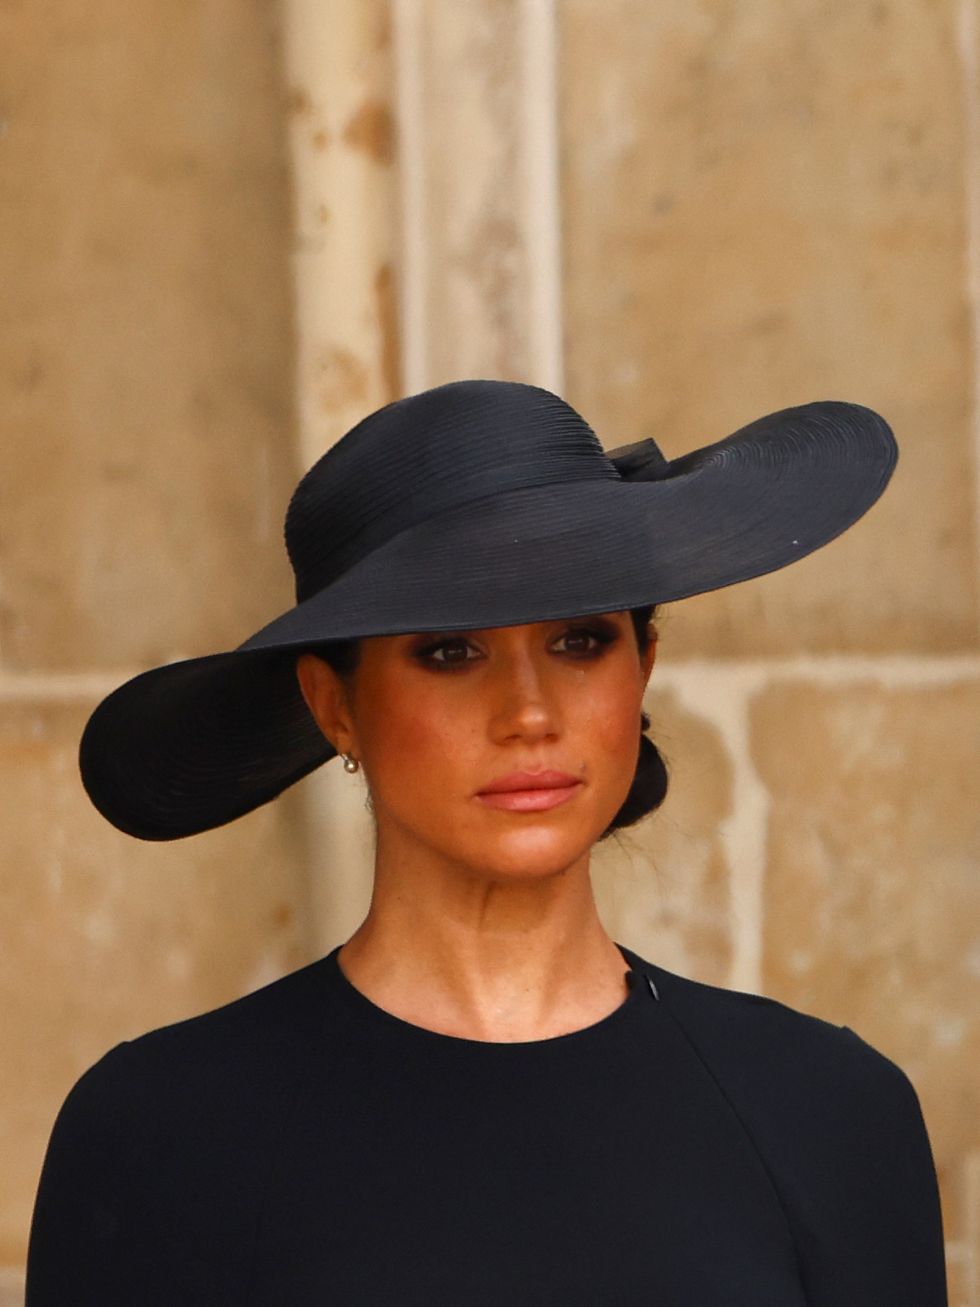 Britain's Meghan, Duchess of Sussex gets emotional as she attends the state funeral and burial of Britain's Queen Elizabeth at Westminster Abbey, in London, Britain, September 19, 2022.  REUTERS/Kai Pfaffenbach